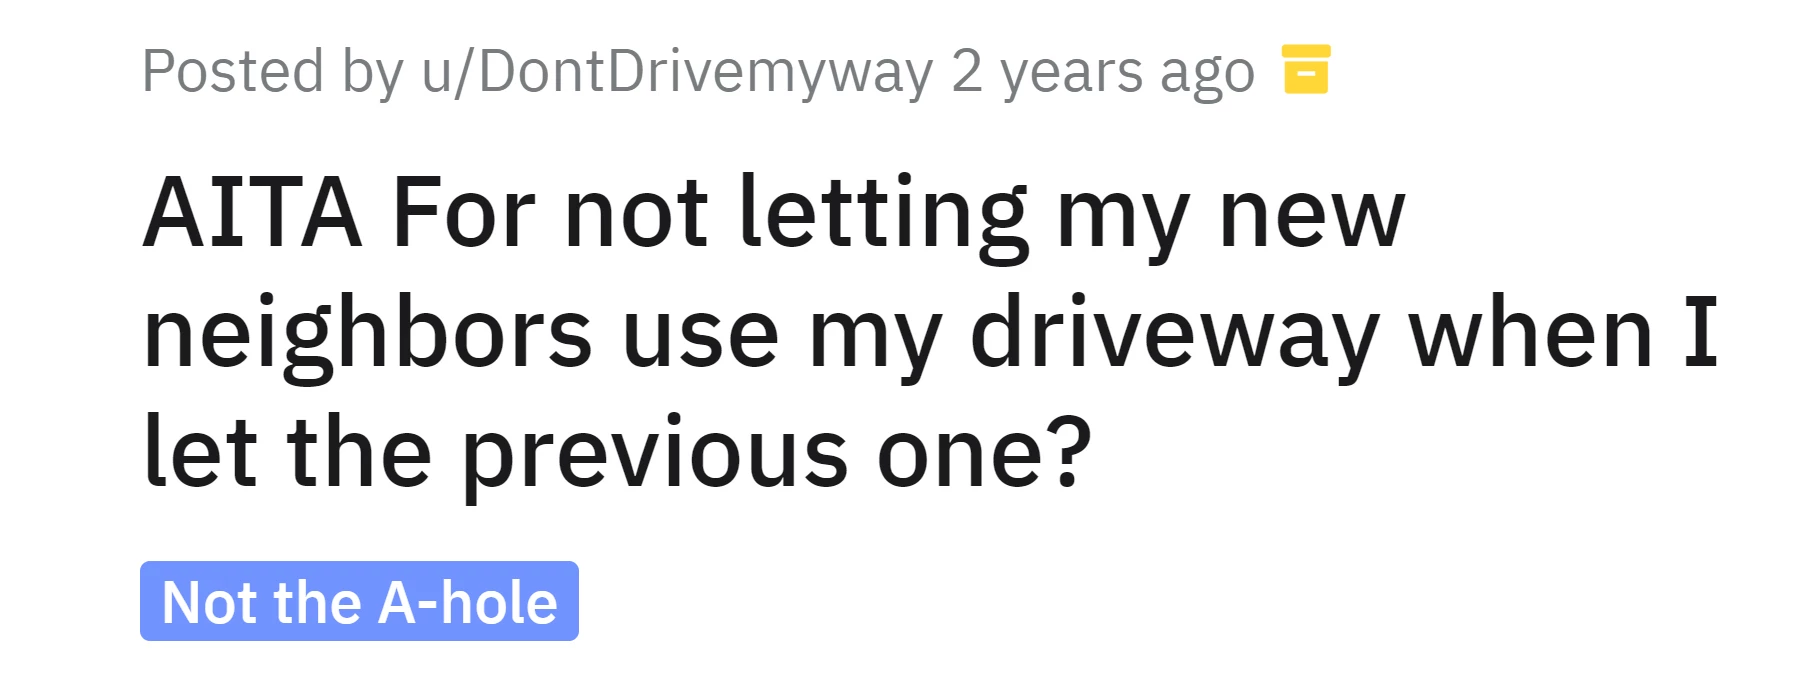 DontDrivemyway's story